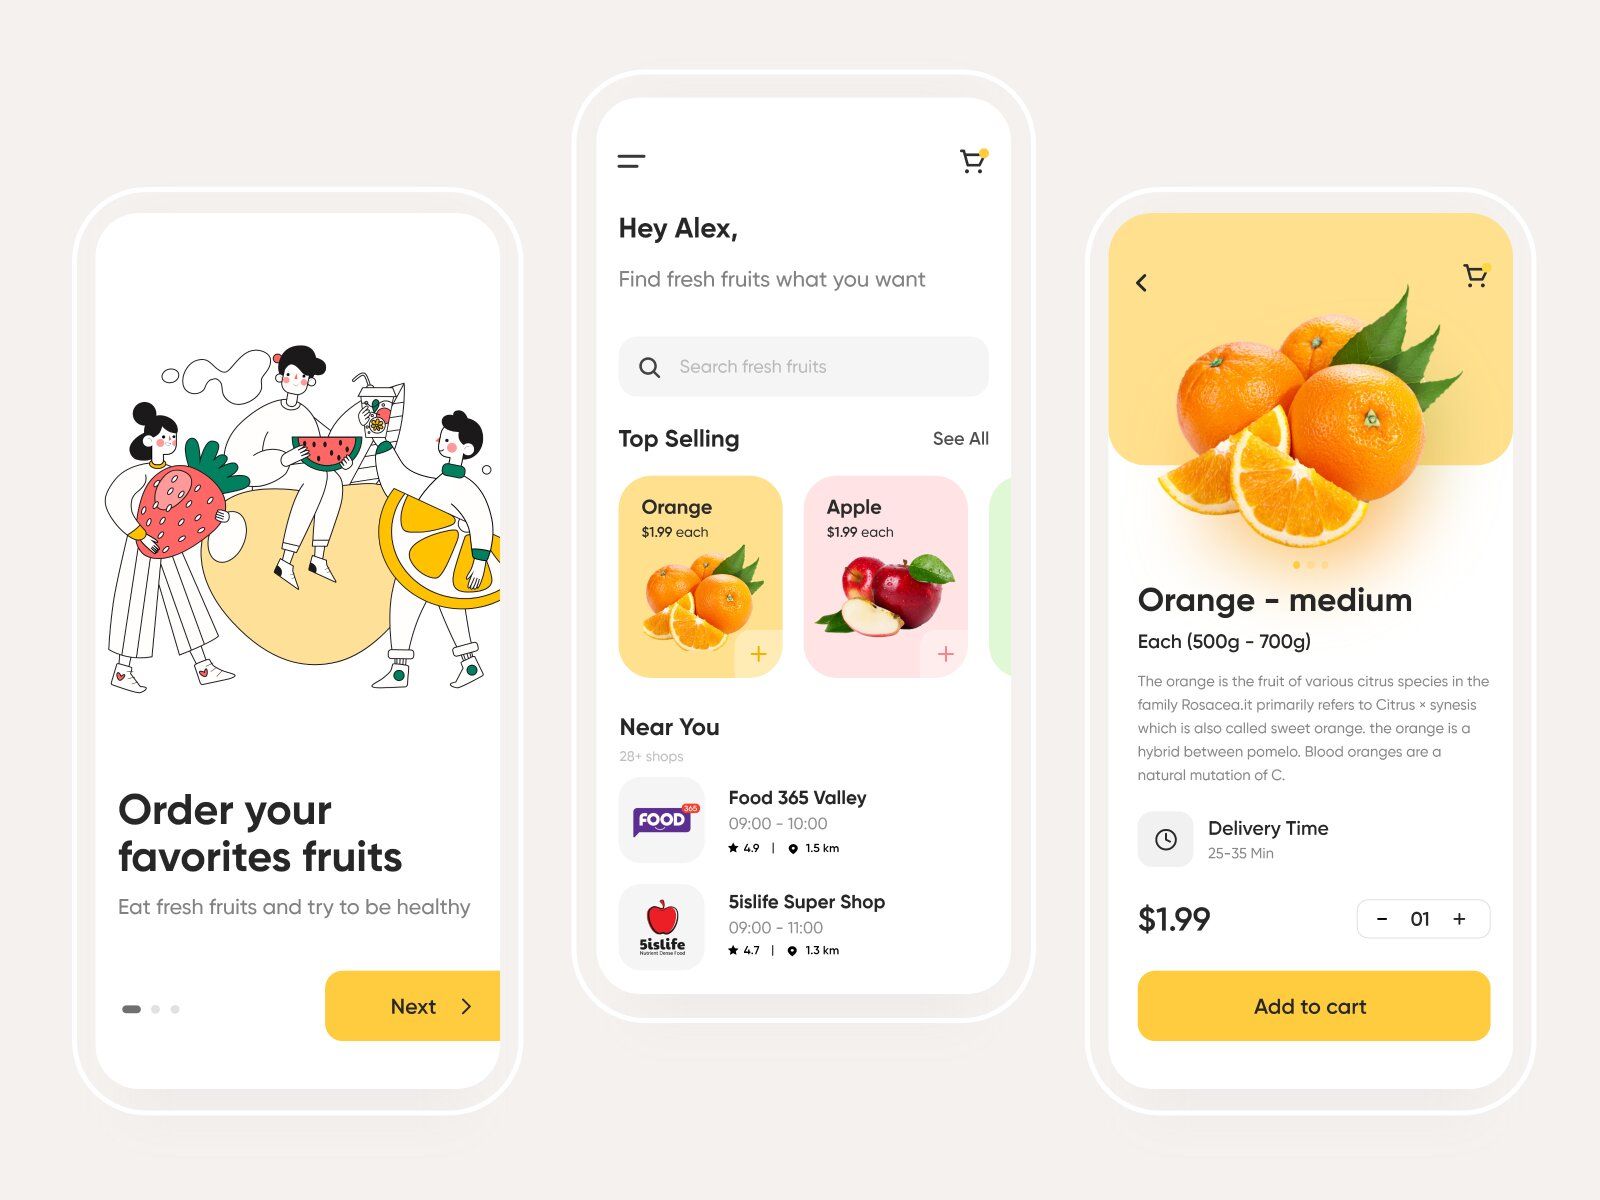 If you have a lot of questions about on demand grocery delivery app development, read this article to find the answers (*image by [Chayan Sarker](https://dribbble.com/thechayansarker){ rel="nofollow" target="_blank" .default-md}*)